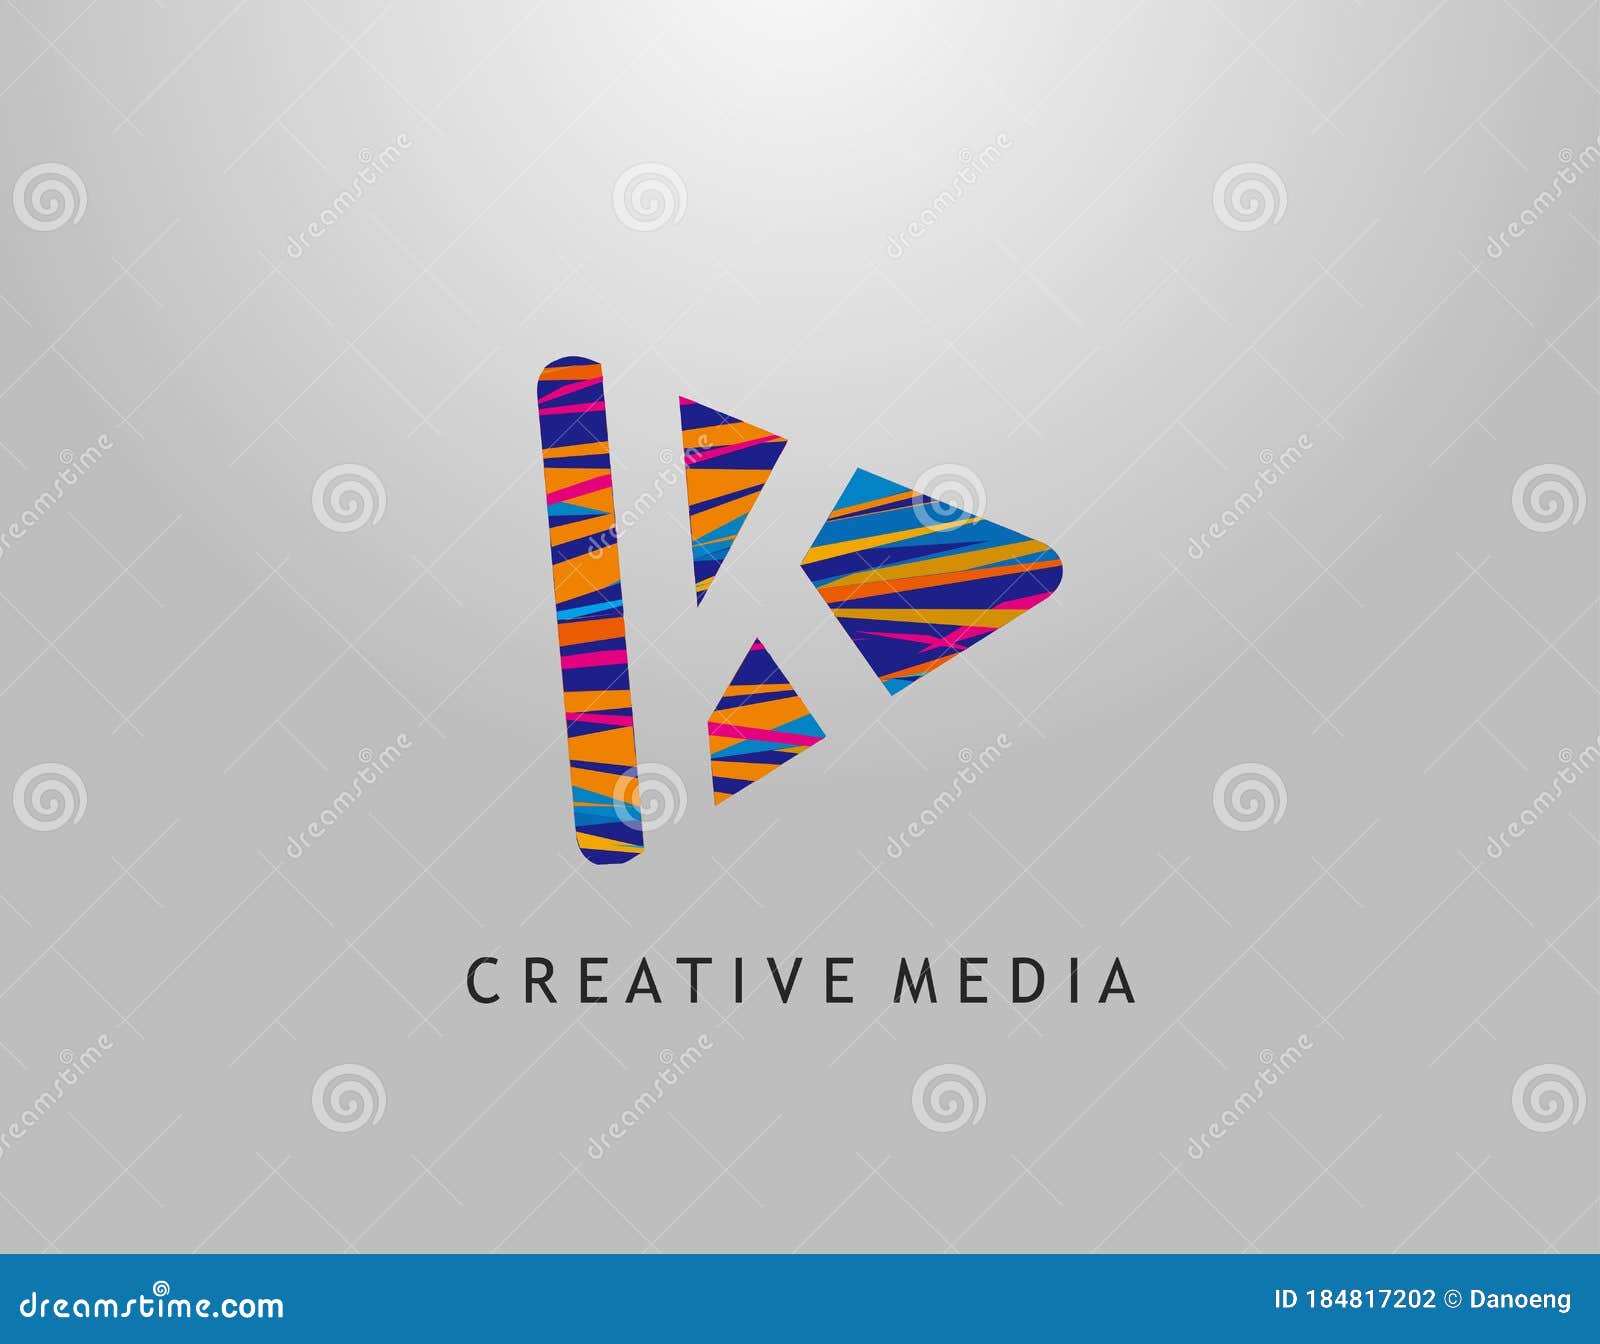 K Letter Logo Play Media Concept Design Perfect For Cinema Movie Music Video Streaming Icon Or Symbol Stock Illustration Illustration Of Movie Identity